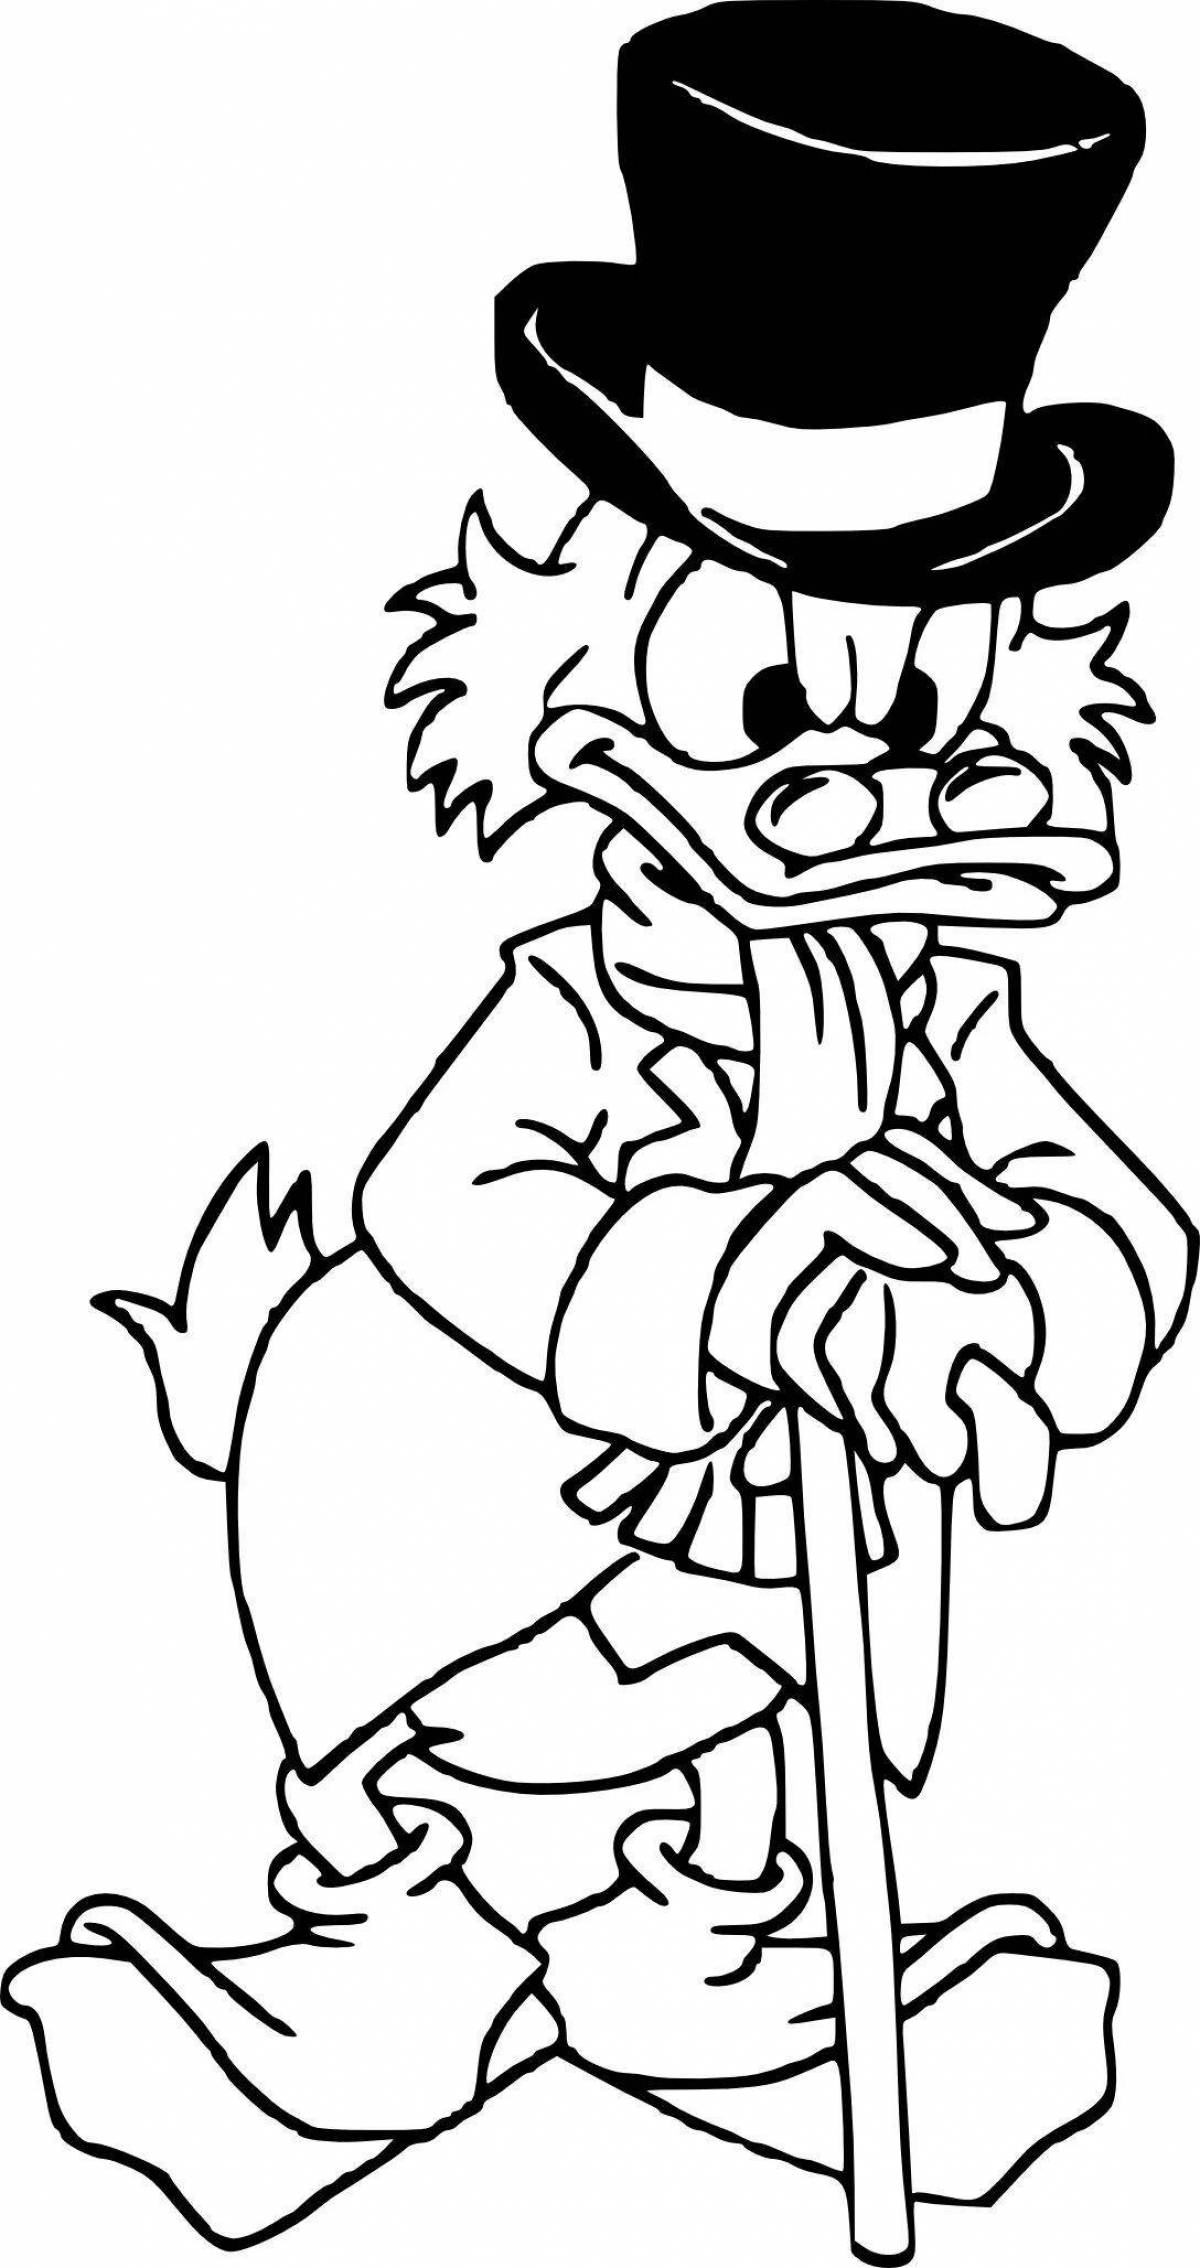 Glittering Scrooge McDuck with money coloring book